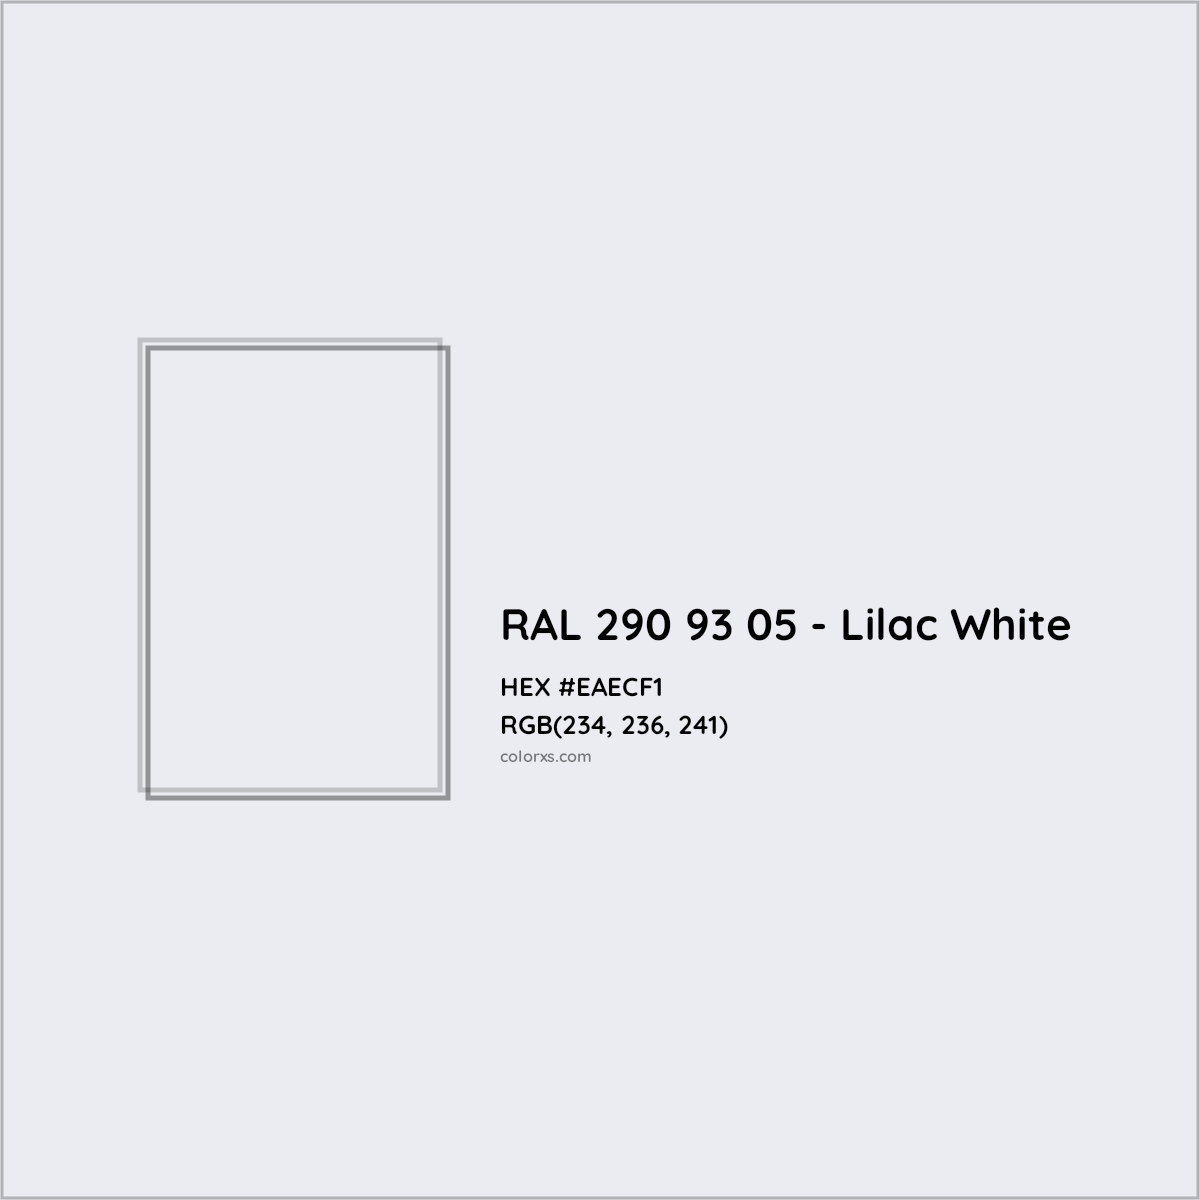 HEX #EAECF1 RAL 290 93 05 - Lilac White CMS RAL Design - Color Code